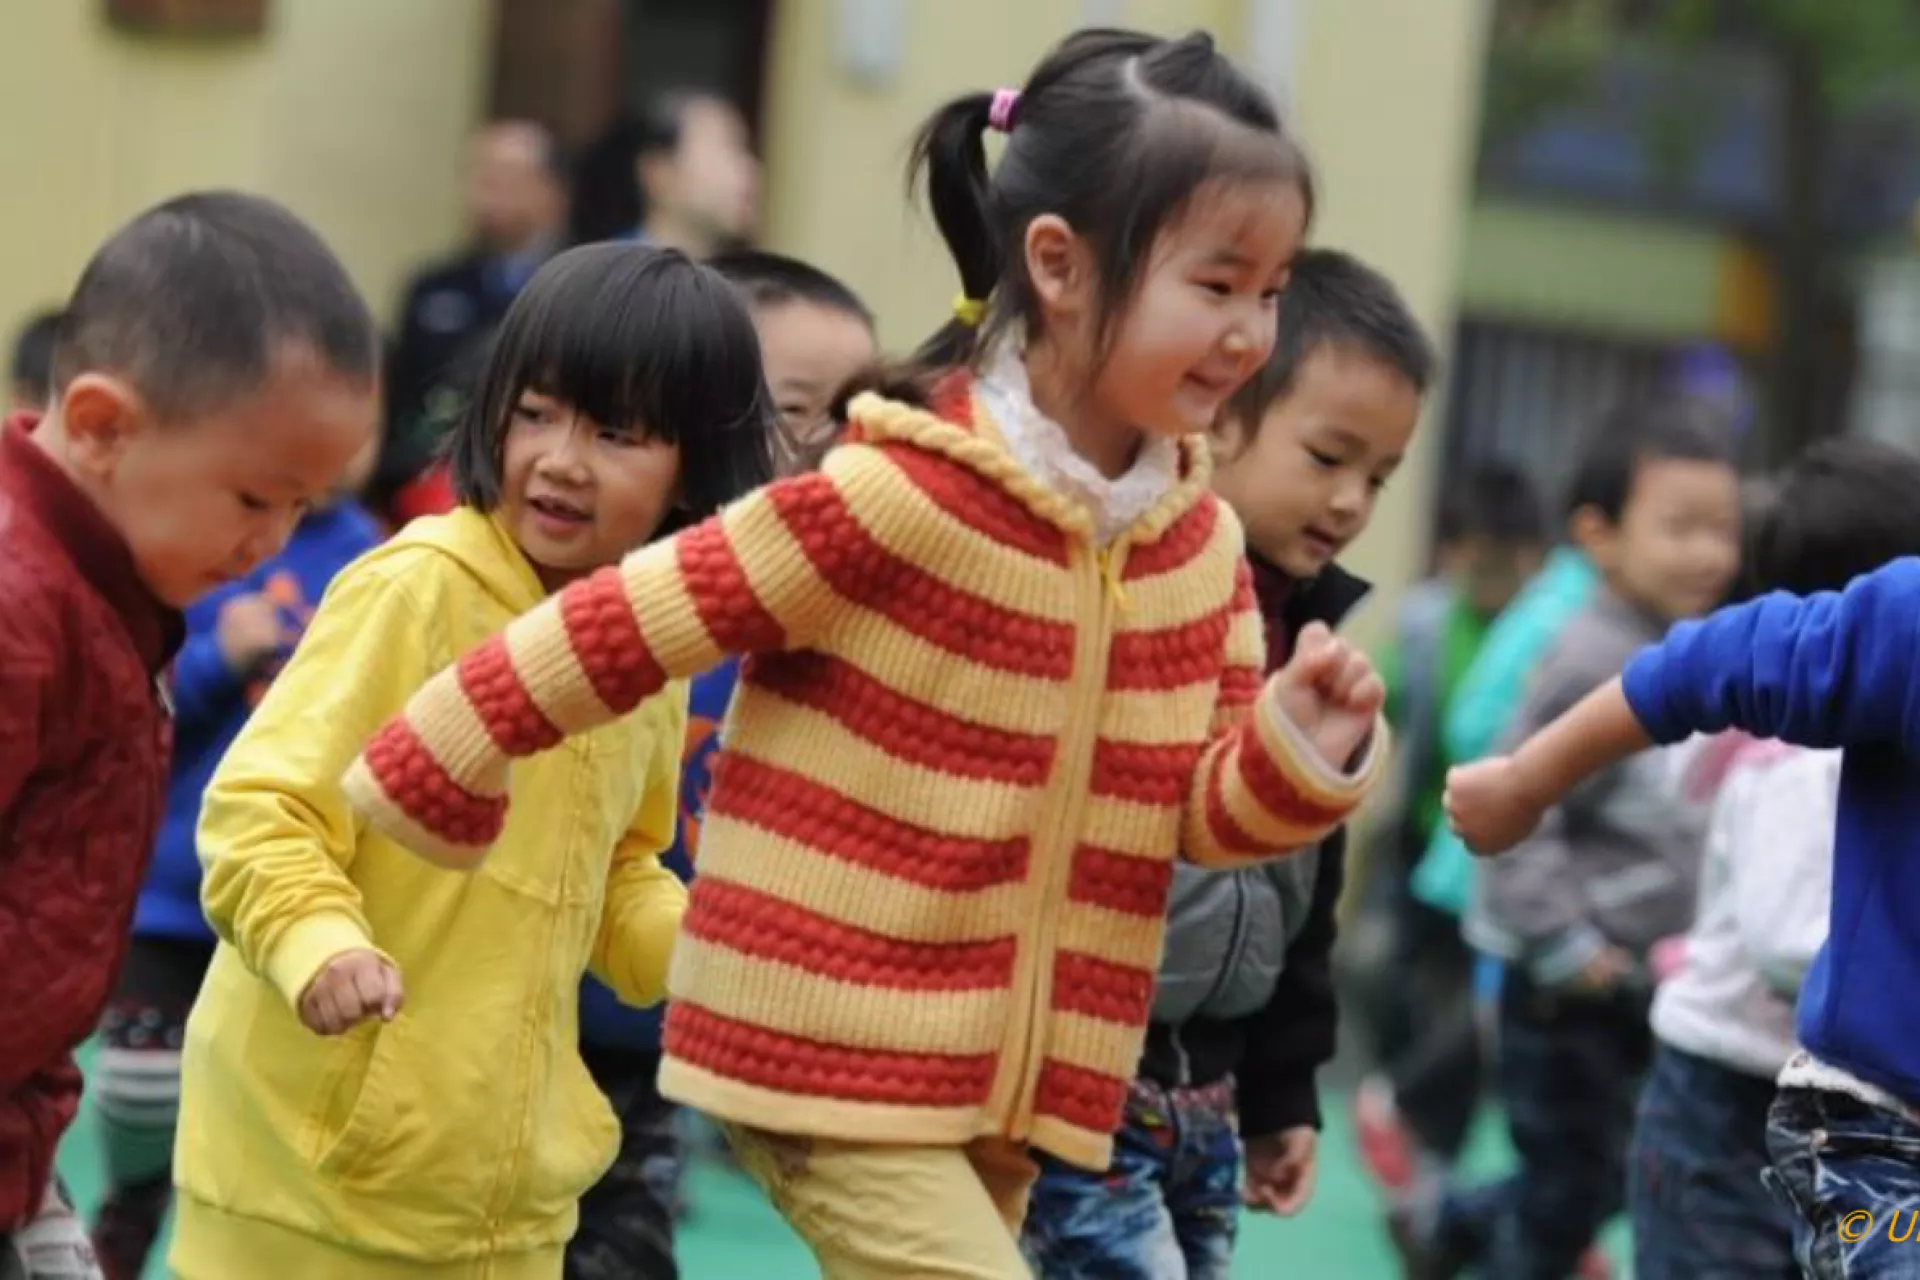 Census Data About Children in China 2013